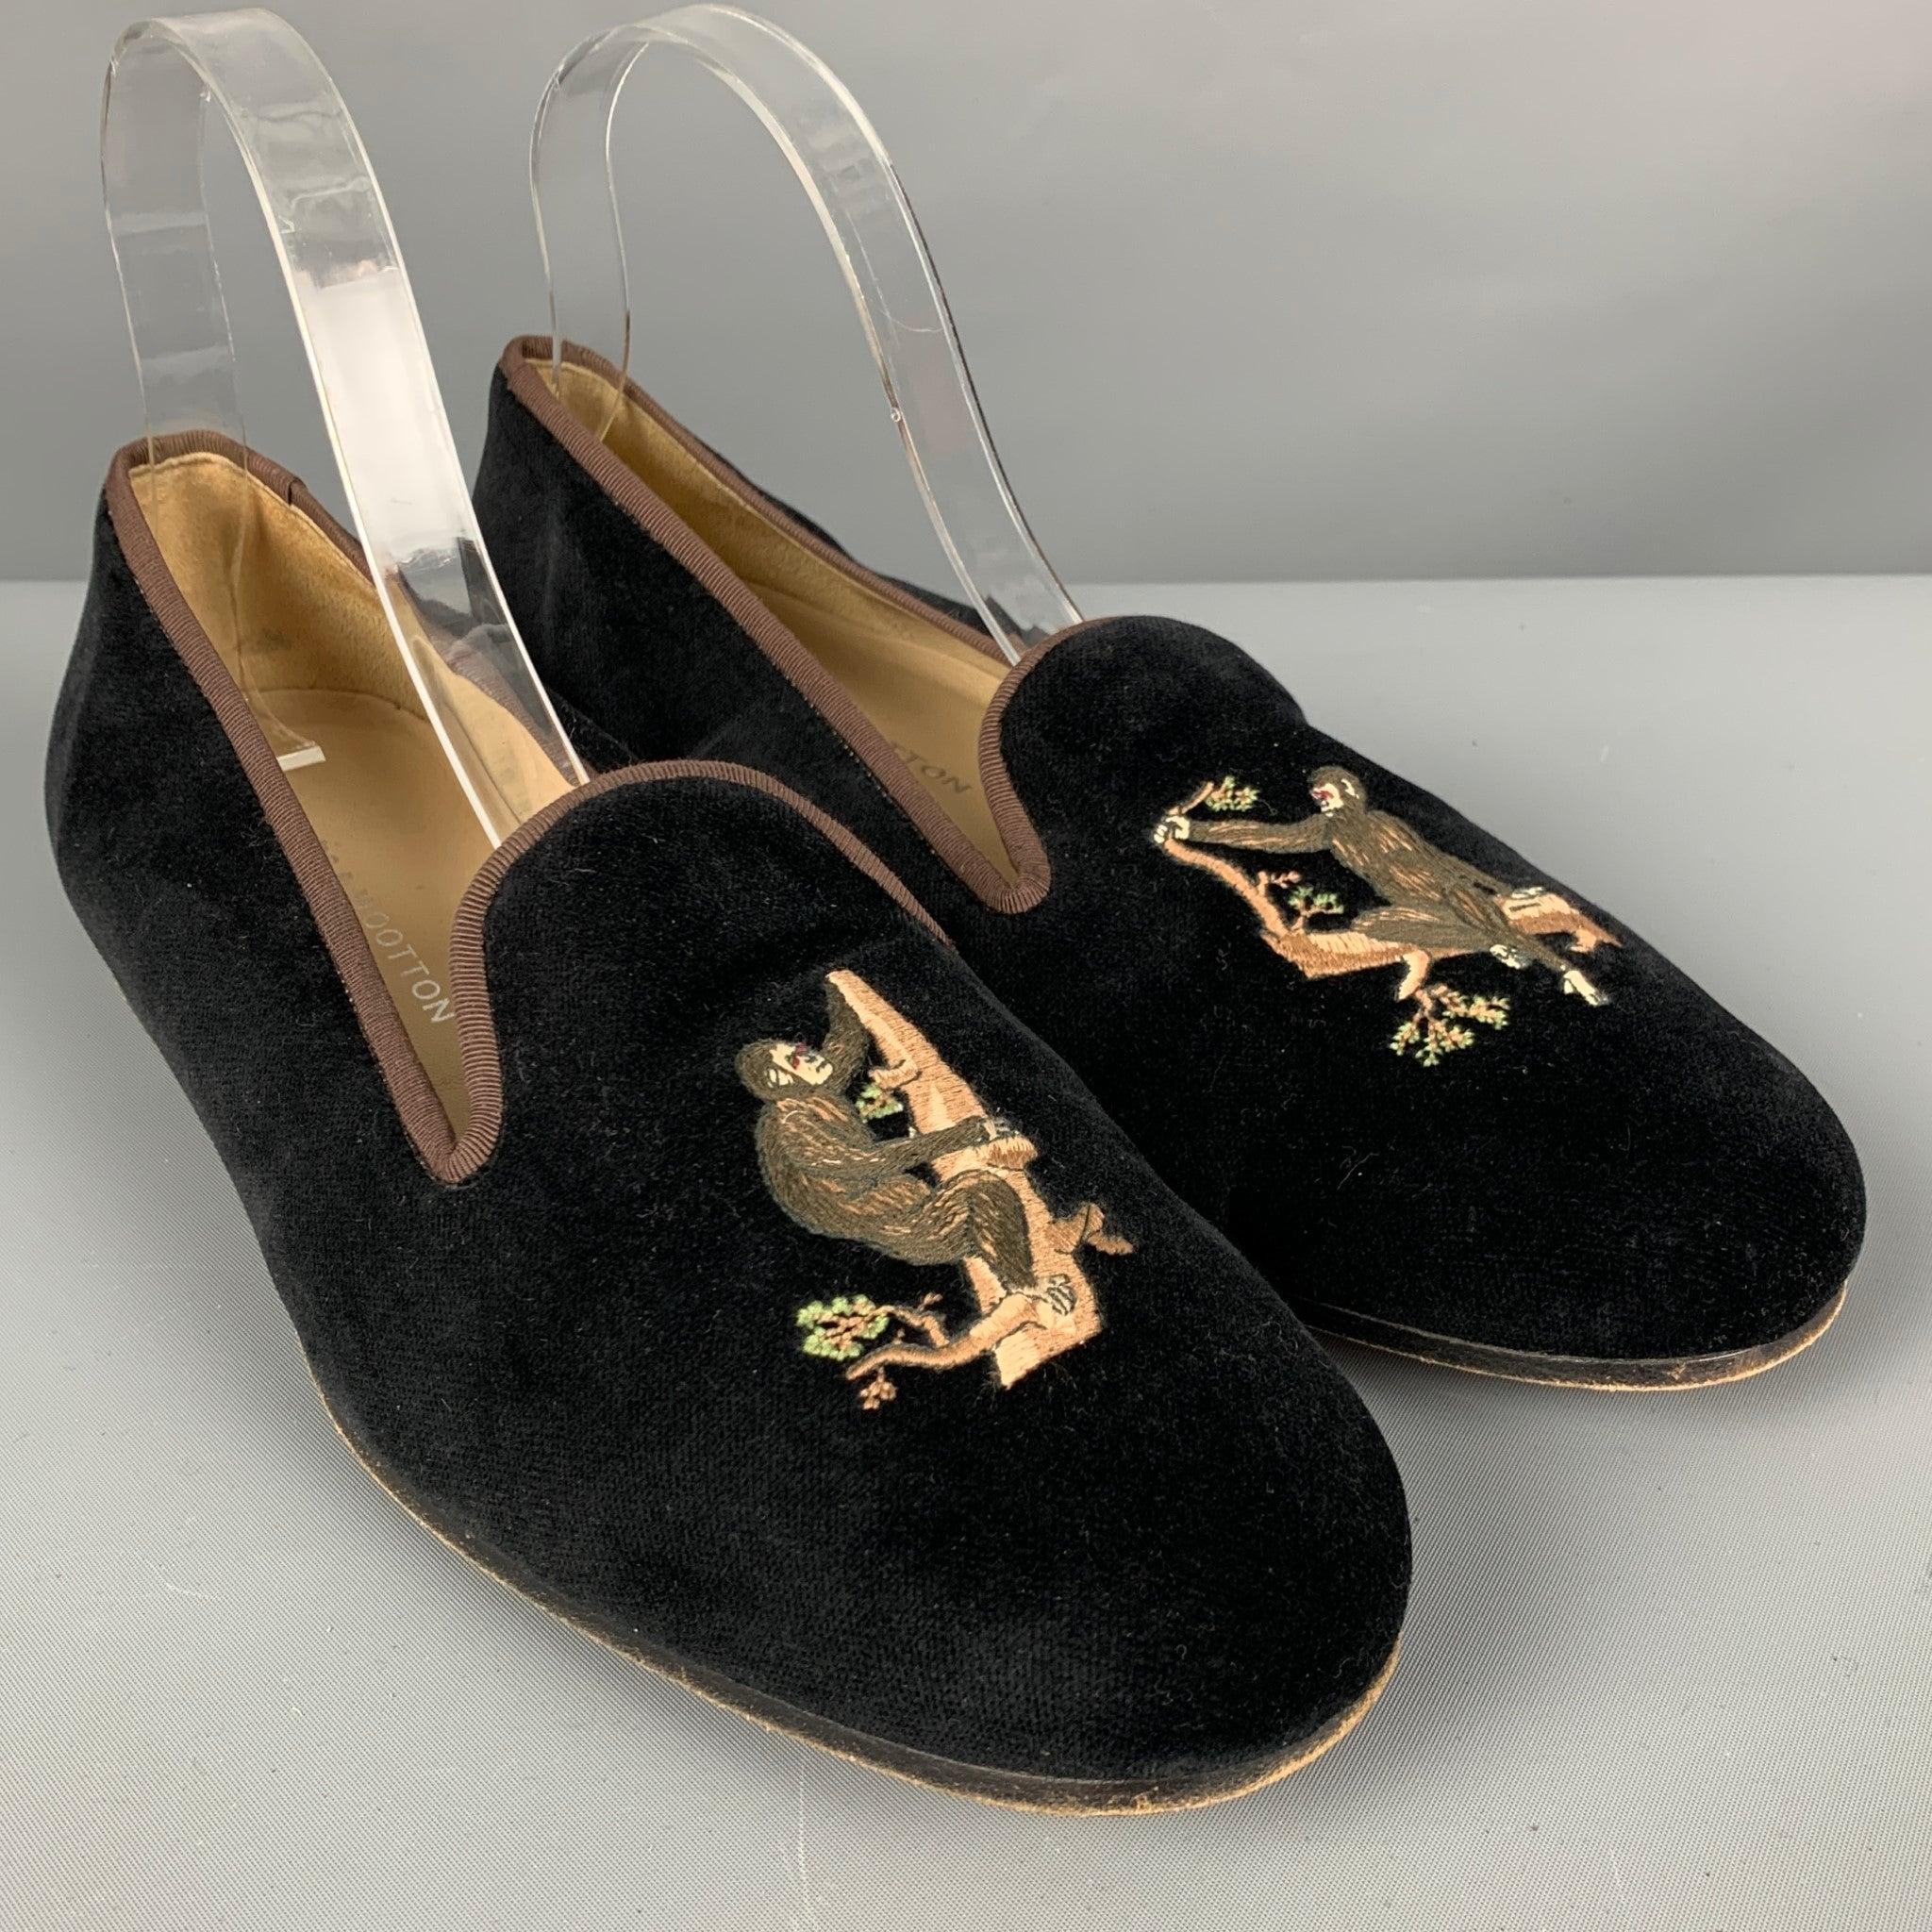 STUBBS & WOOTTON loafers
in a black velvet fabric featuring monkey embroidery motif and brown trim. Made in Spainches Very Good Pre-Owned Condition. Minor signs of wear. 

Marked:   10.5Outsole:11.25 inches  x 3.75 inches  
  
  
 
Reference: